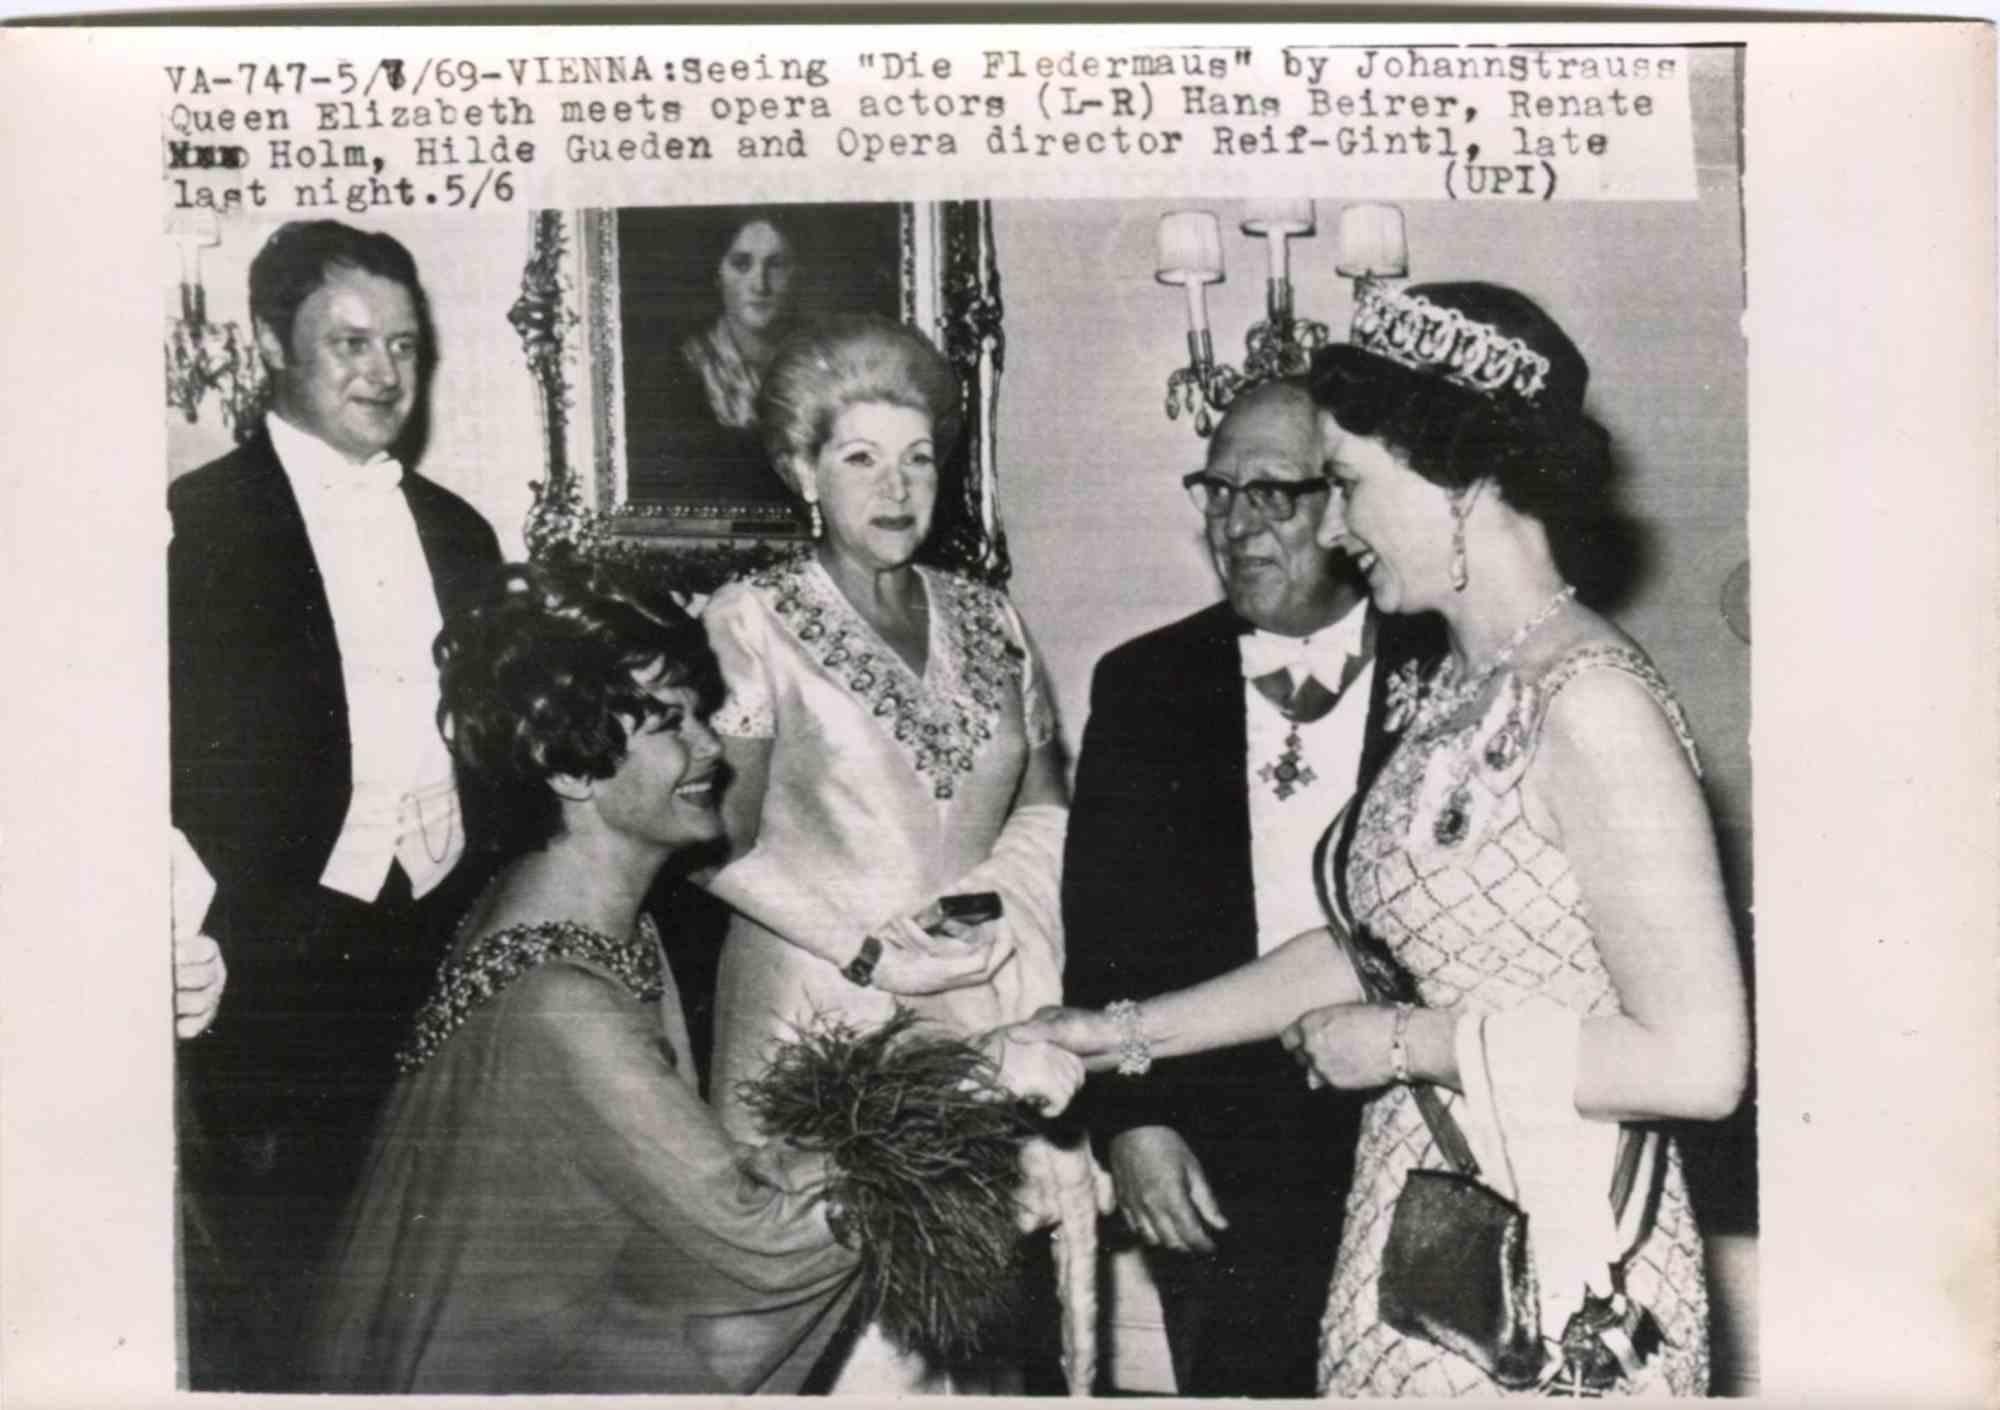 Unknown Black and White Photograph - Queen Elizabeth II at the Opera in Wien - Vintage Photograph - 1960s